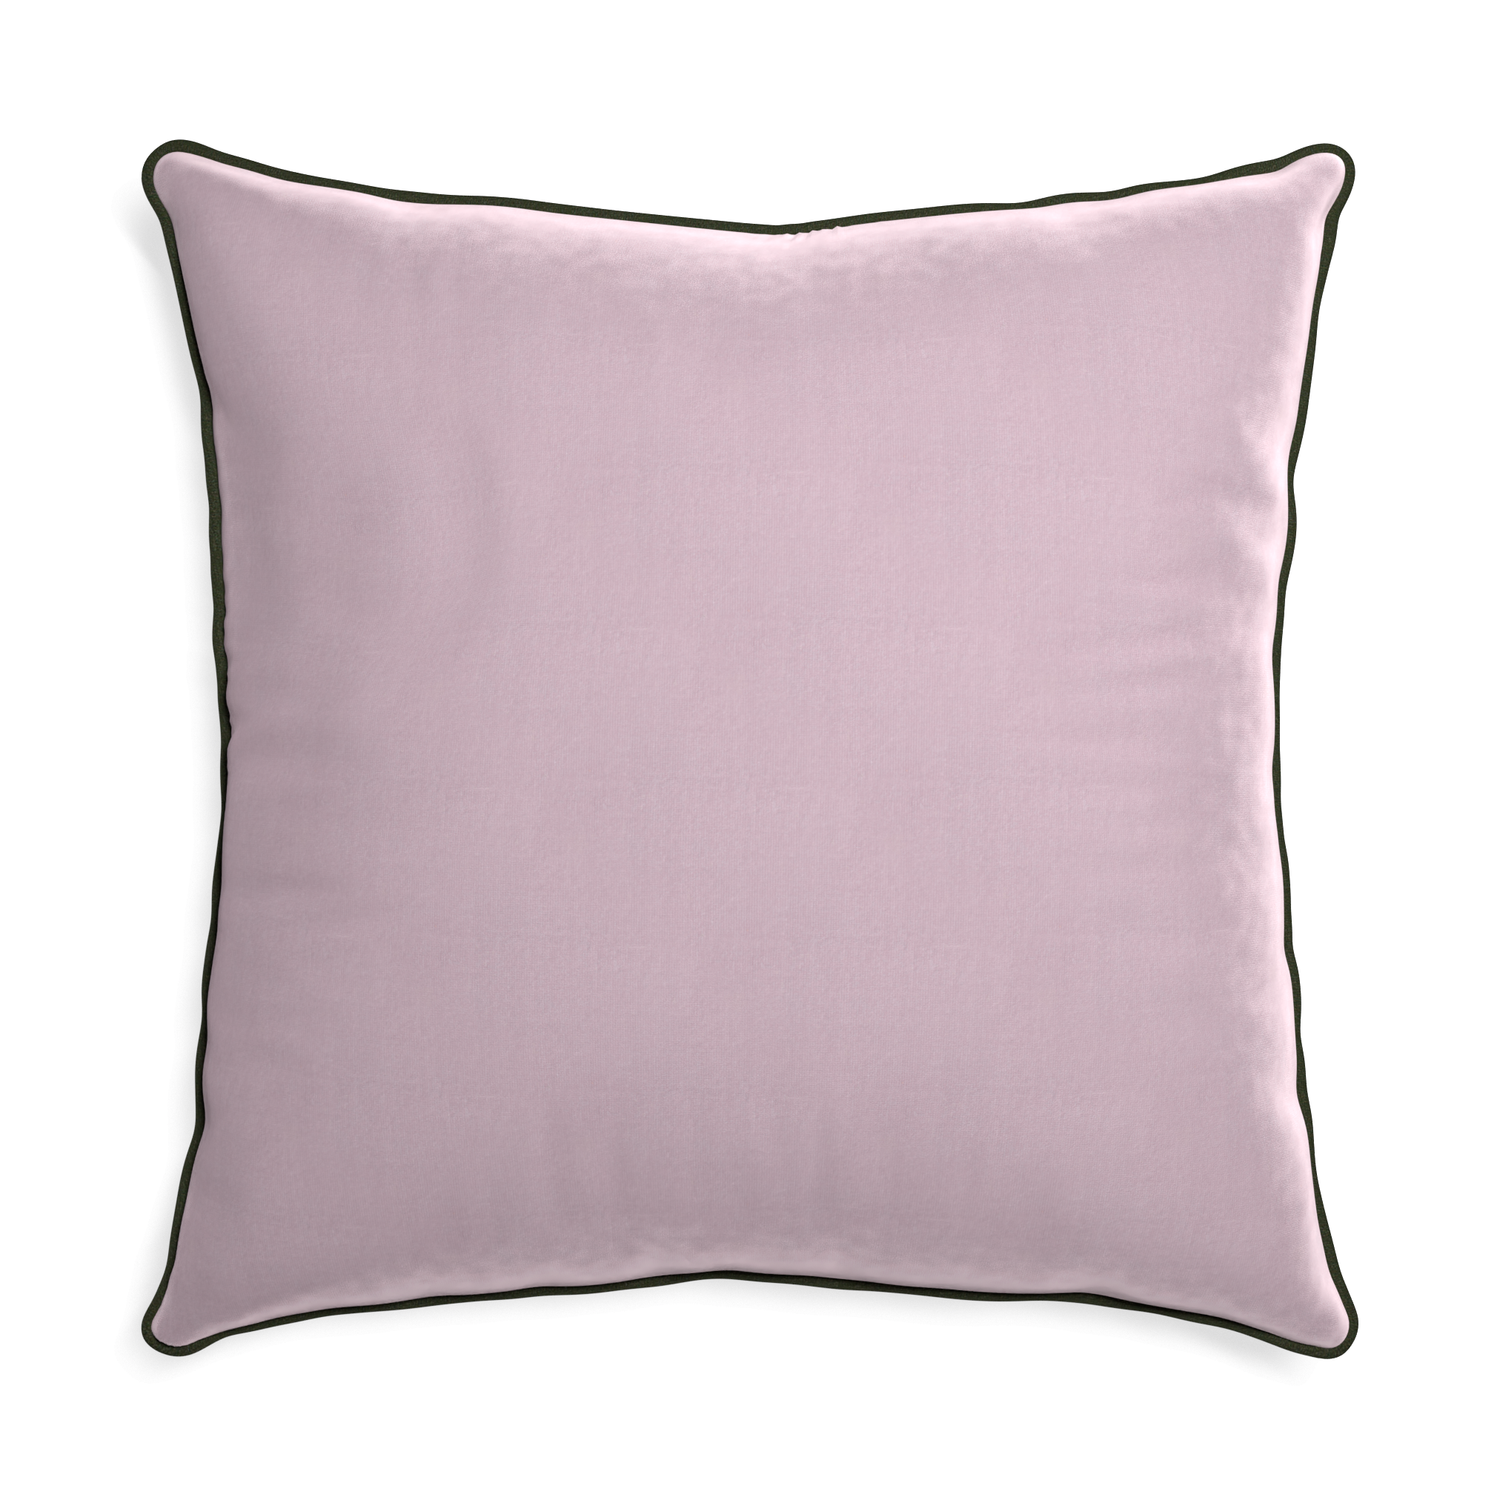 Euro-sham lilac velvet custom pillow with f piping on white background